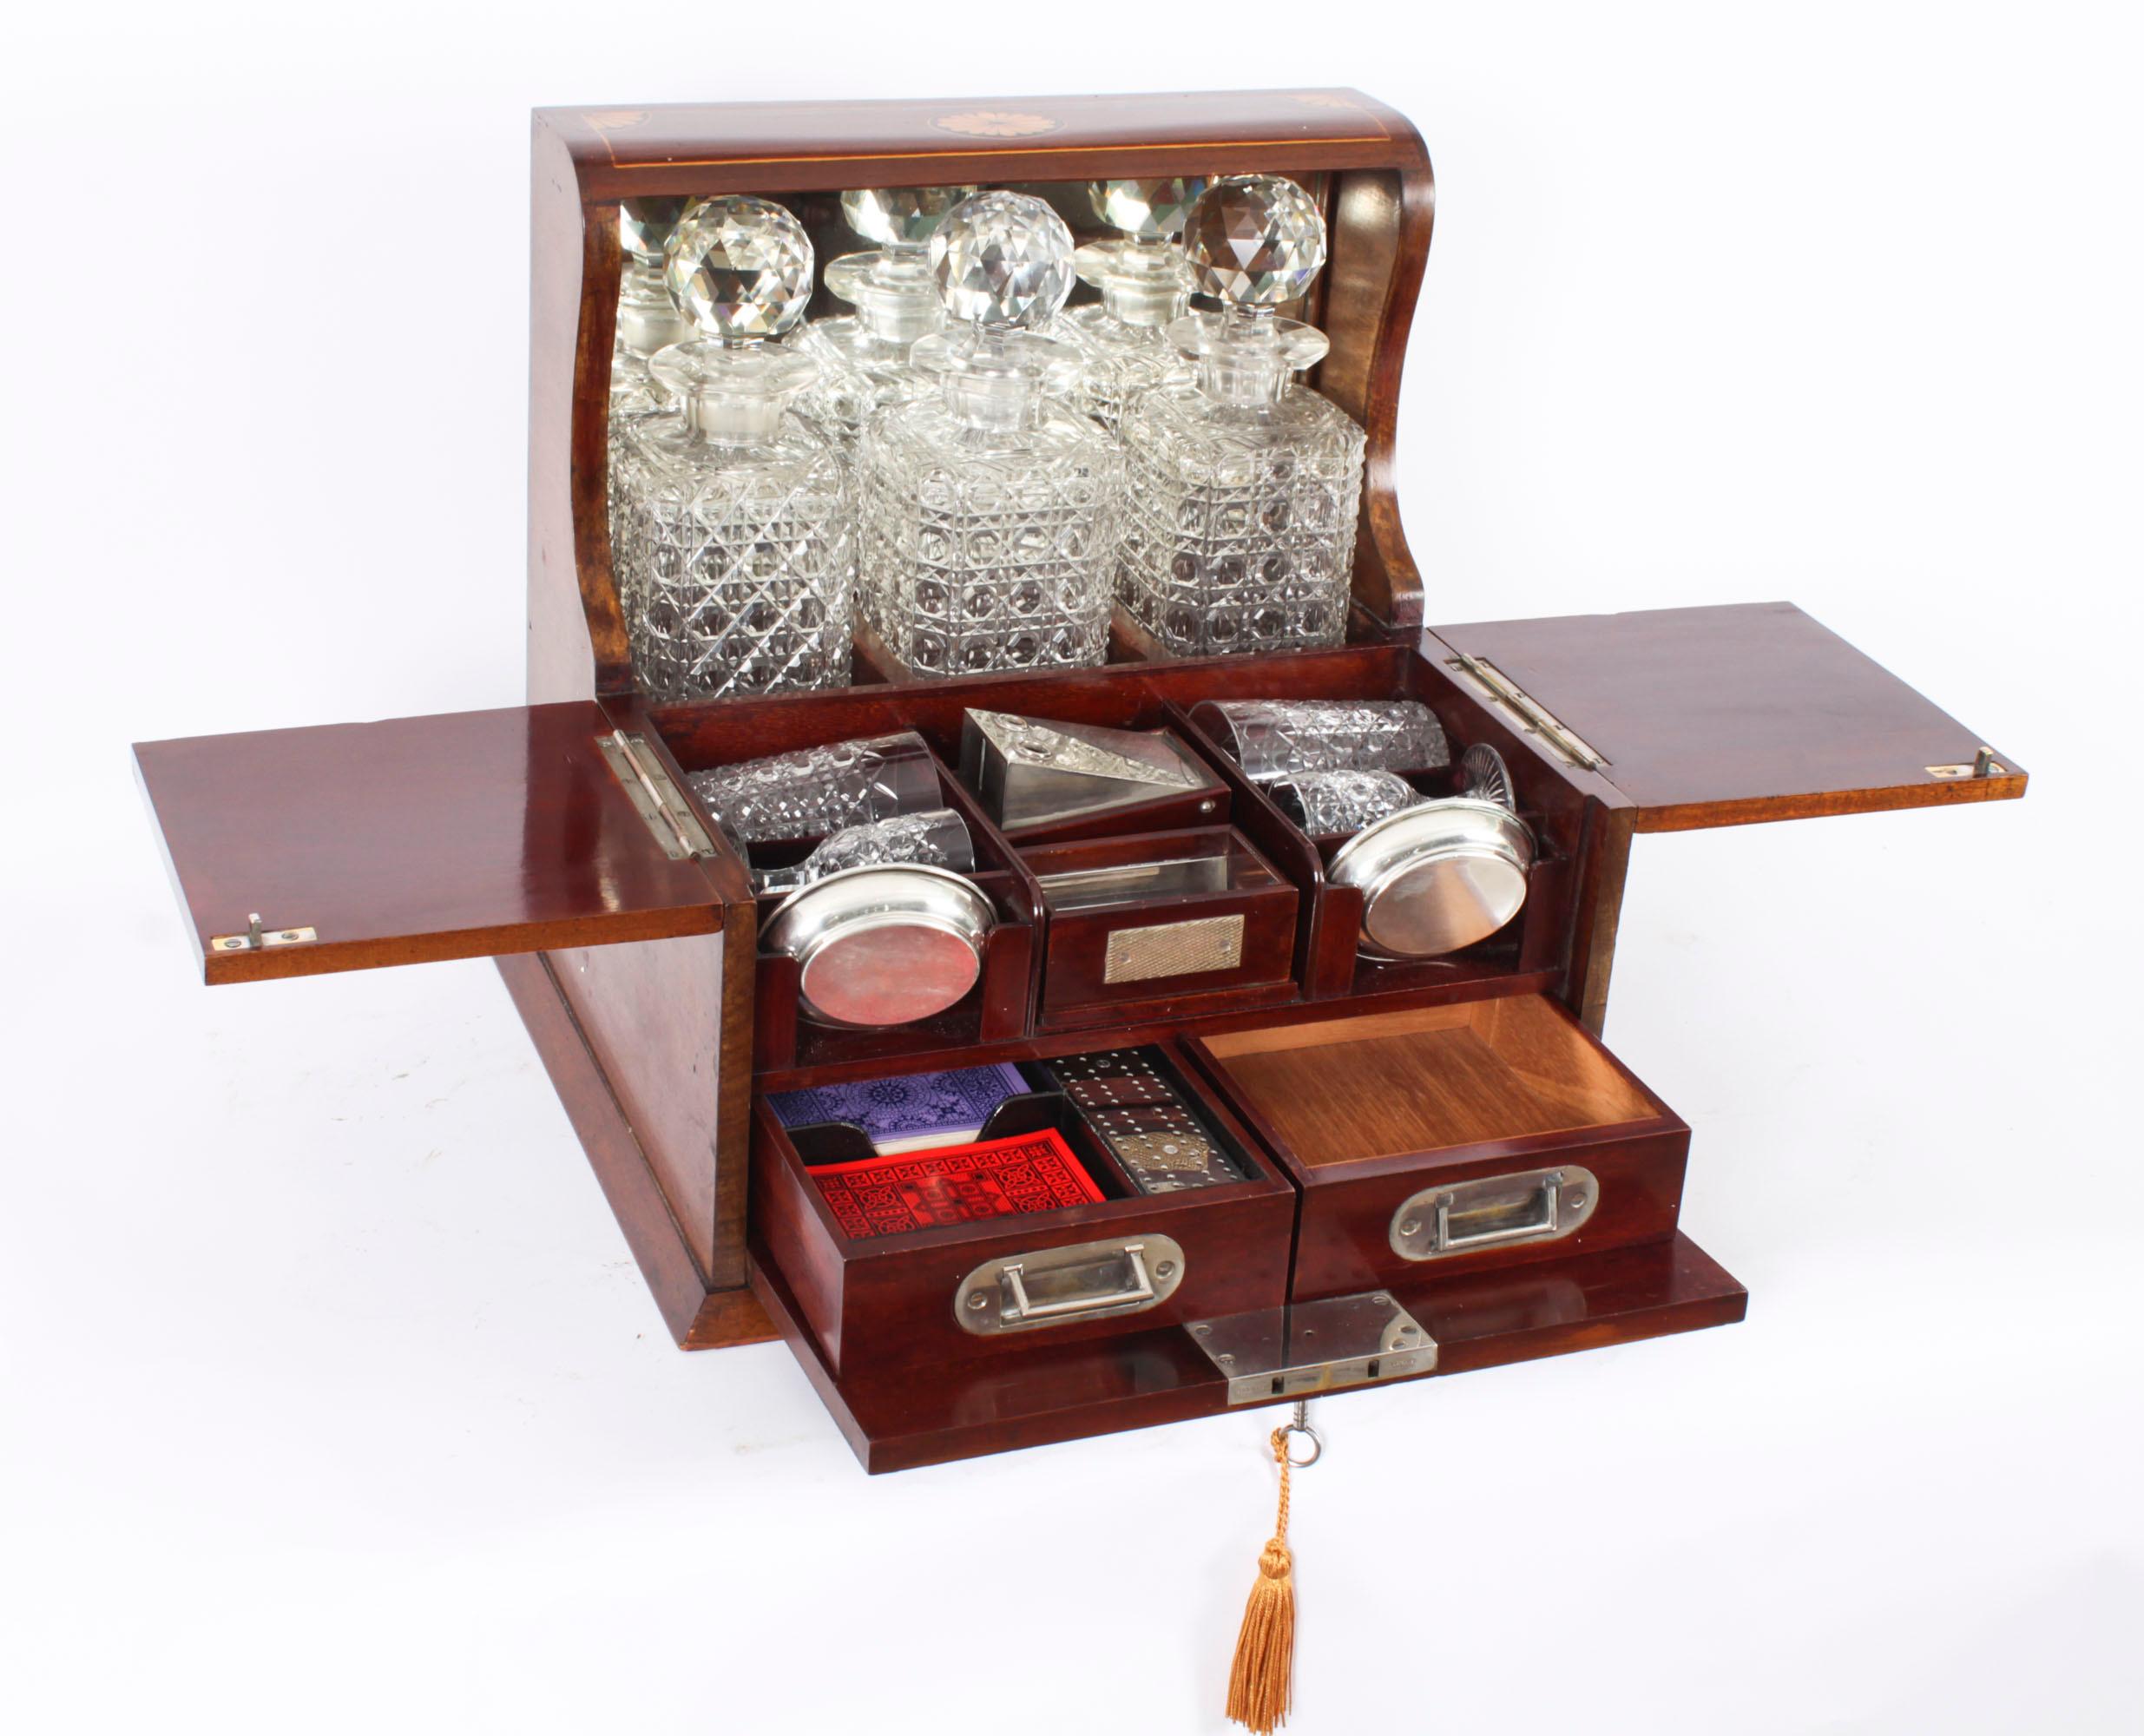 This is a superb antique Victorian walnut cased three decanter tantalus with decorative inlaid decoration and a games drawer, C1890 in date.

It was skillfully crafted with beautiful fan marquetry with line inlaid decoration, stylish brass handles